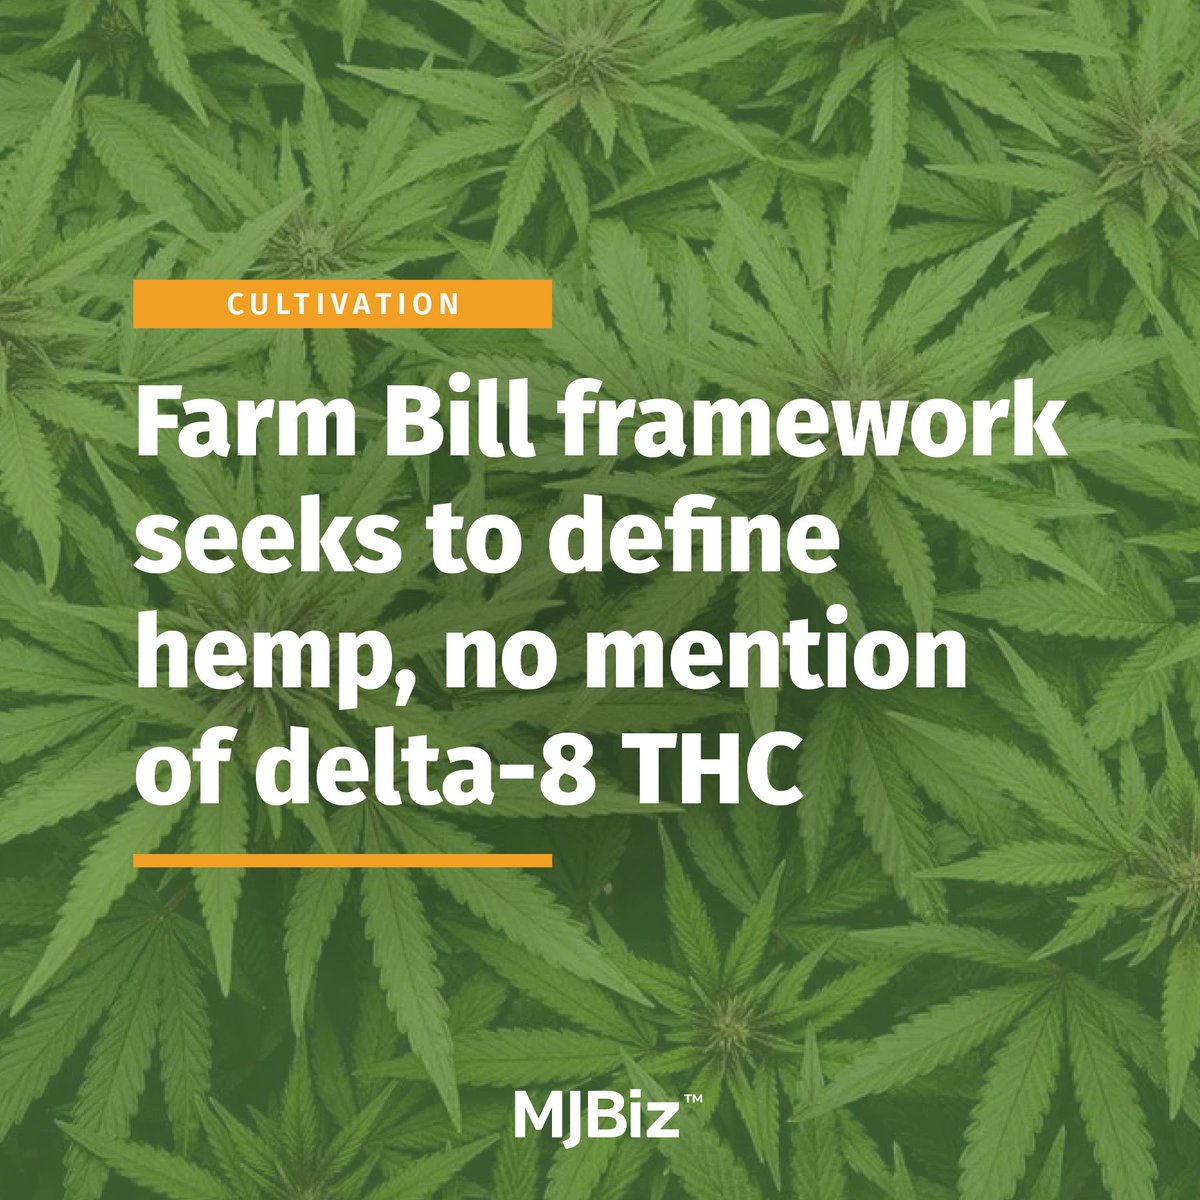 Democratic leaders on the U.S. Senate Agricultural Committee seek to define industrial hemp in the upcoming U.S. #FarmBill.

The framework stops short of attempting to put the genie back in the bottle for intoxicating #hemp-based cannabinoids, which  inadvertently were legalized…